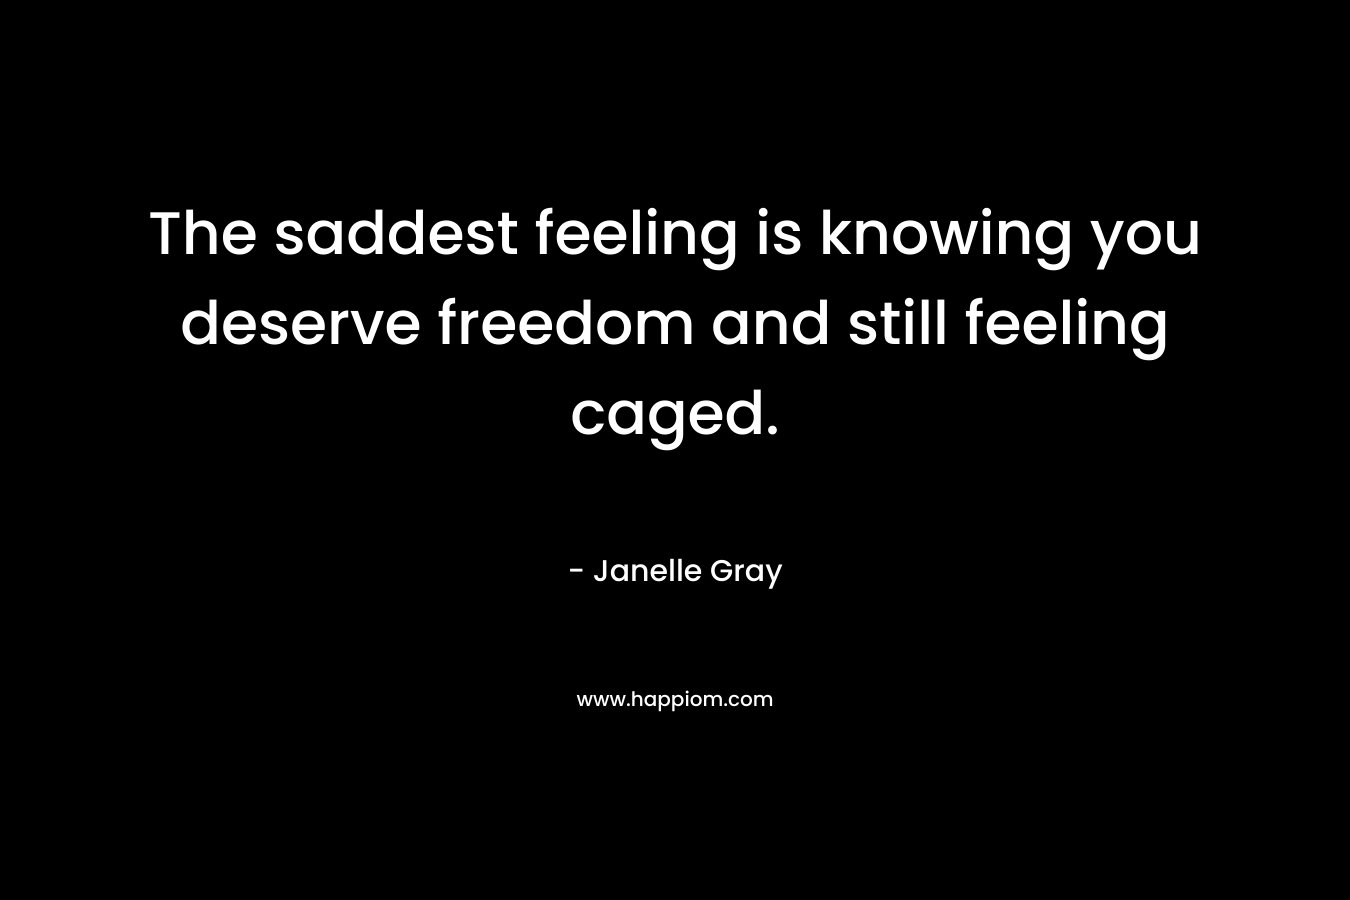 The saddest feeling is knowing you deserve freedom and still feeling caged.